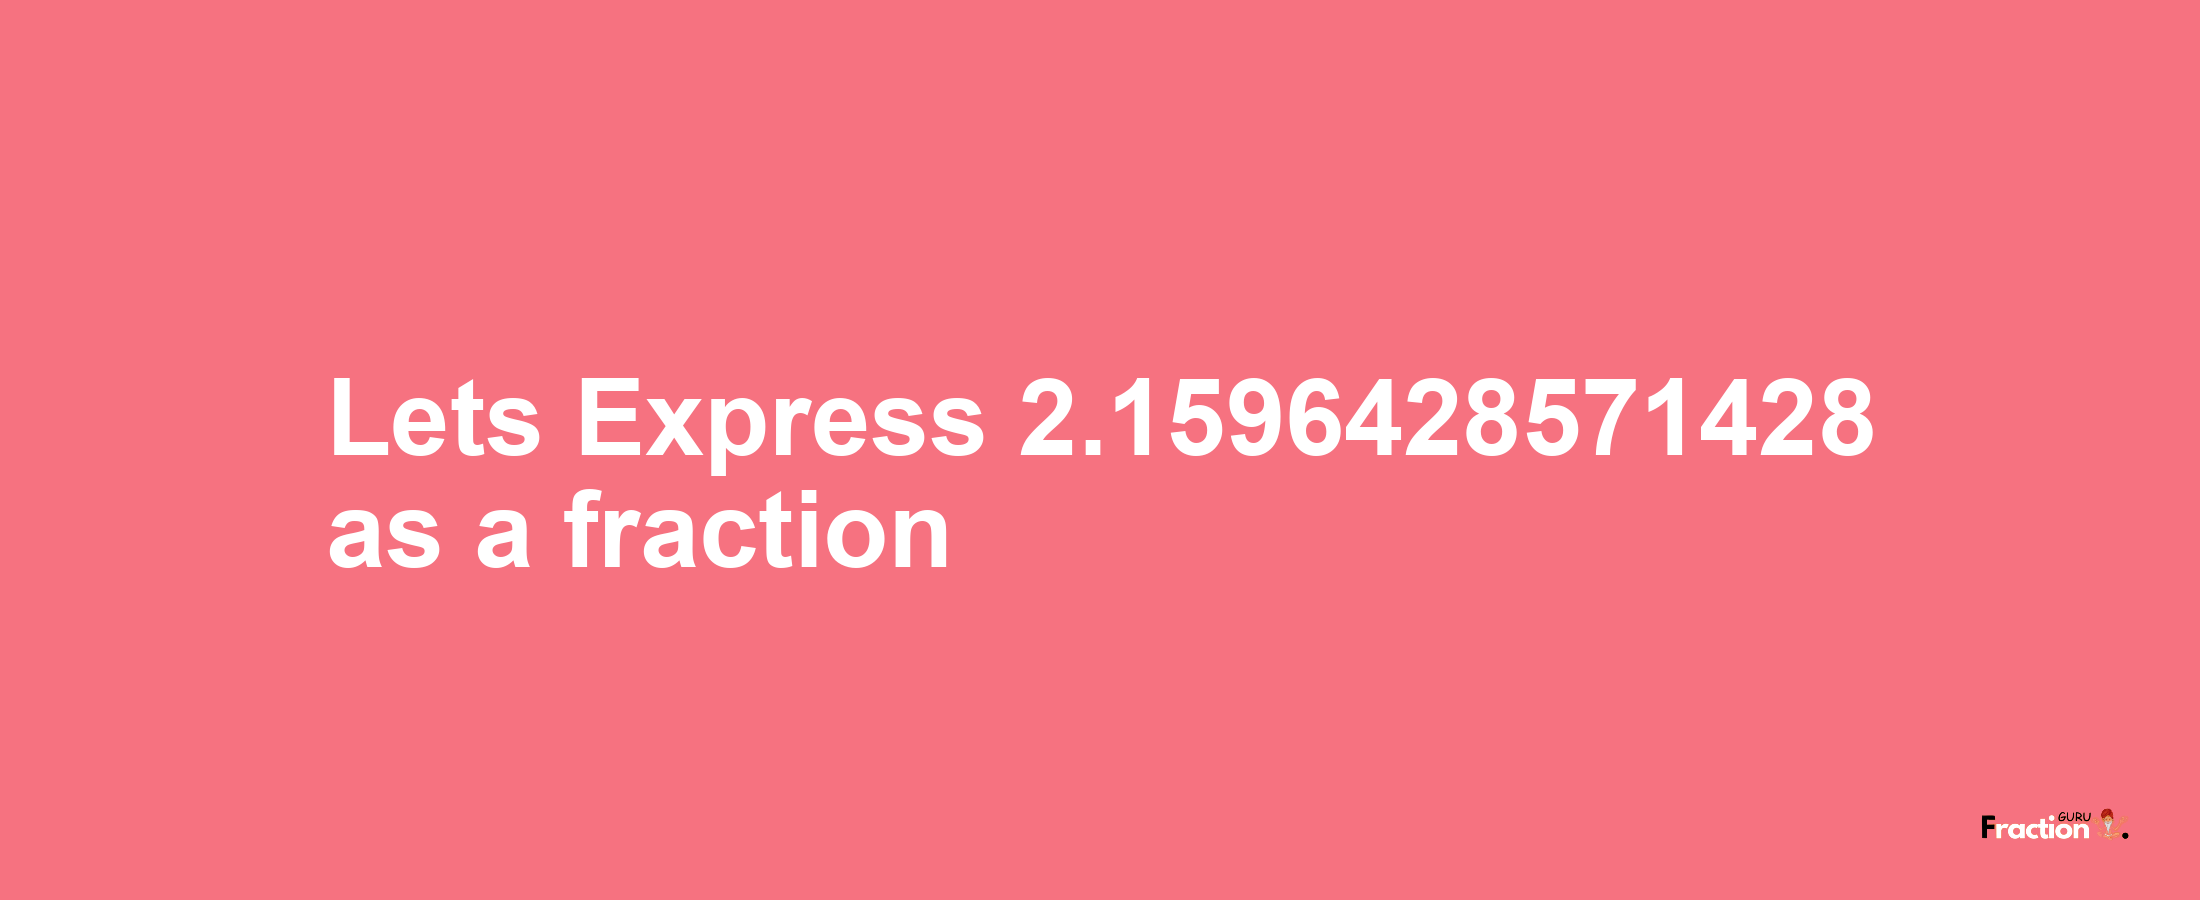 Lets Express 2.1596428571428 as afraction